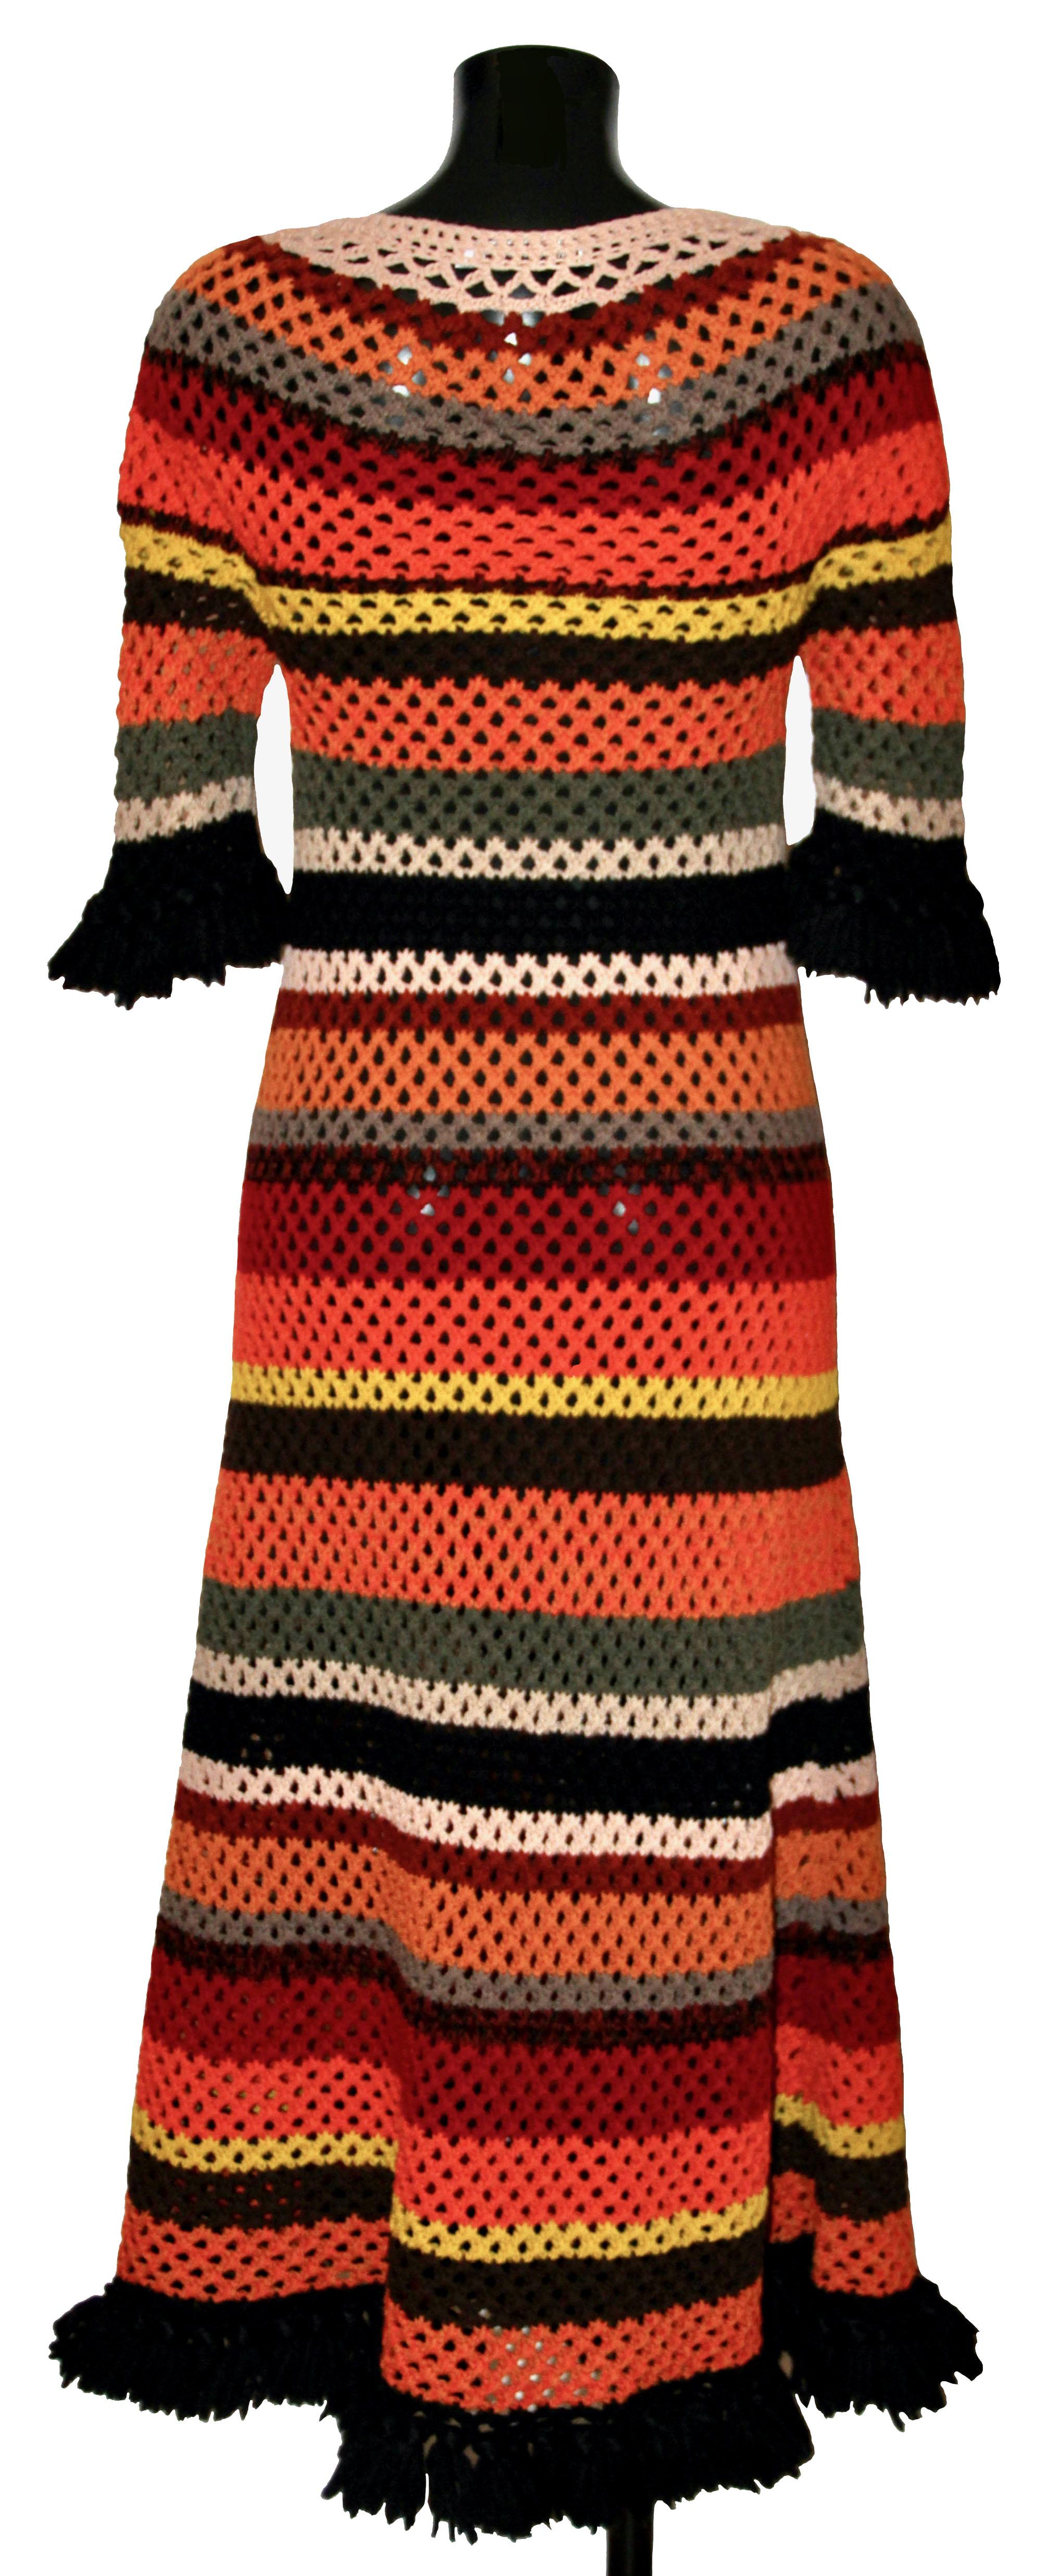 This 60's inspired dress from the 2018 Resort Collection from Dior is crocheted in kaleidoscopic stripes.
It features a ribbed neckline and a fringe finish at the hemline and sleeves.

Collection: Resort 2018
Fabric: 100% virgin wool
Color : Red,